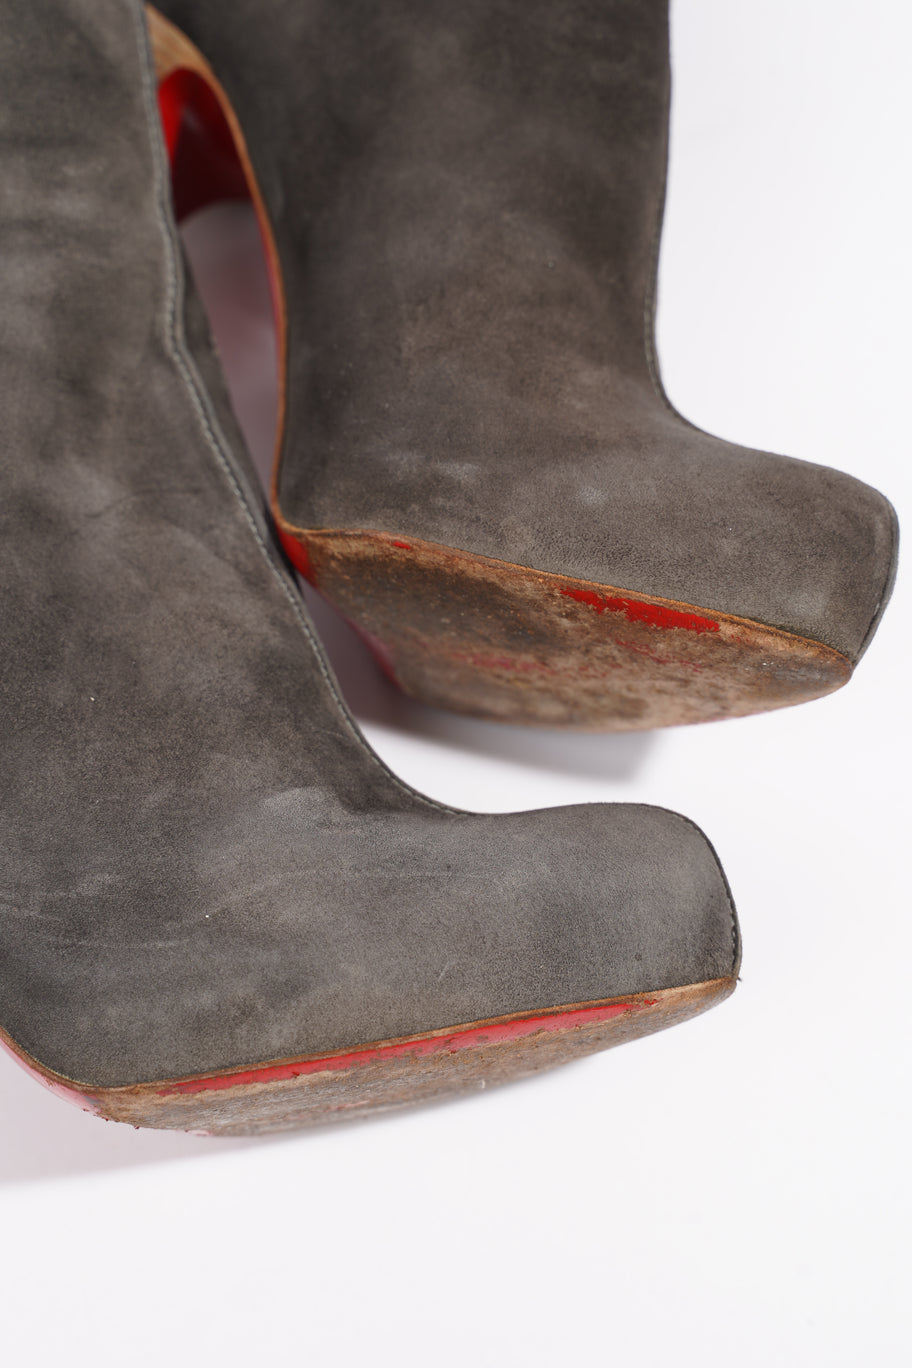 Ankle Boot Grey Suede EU 38 UK 5 Image 9